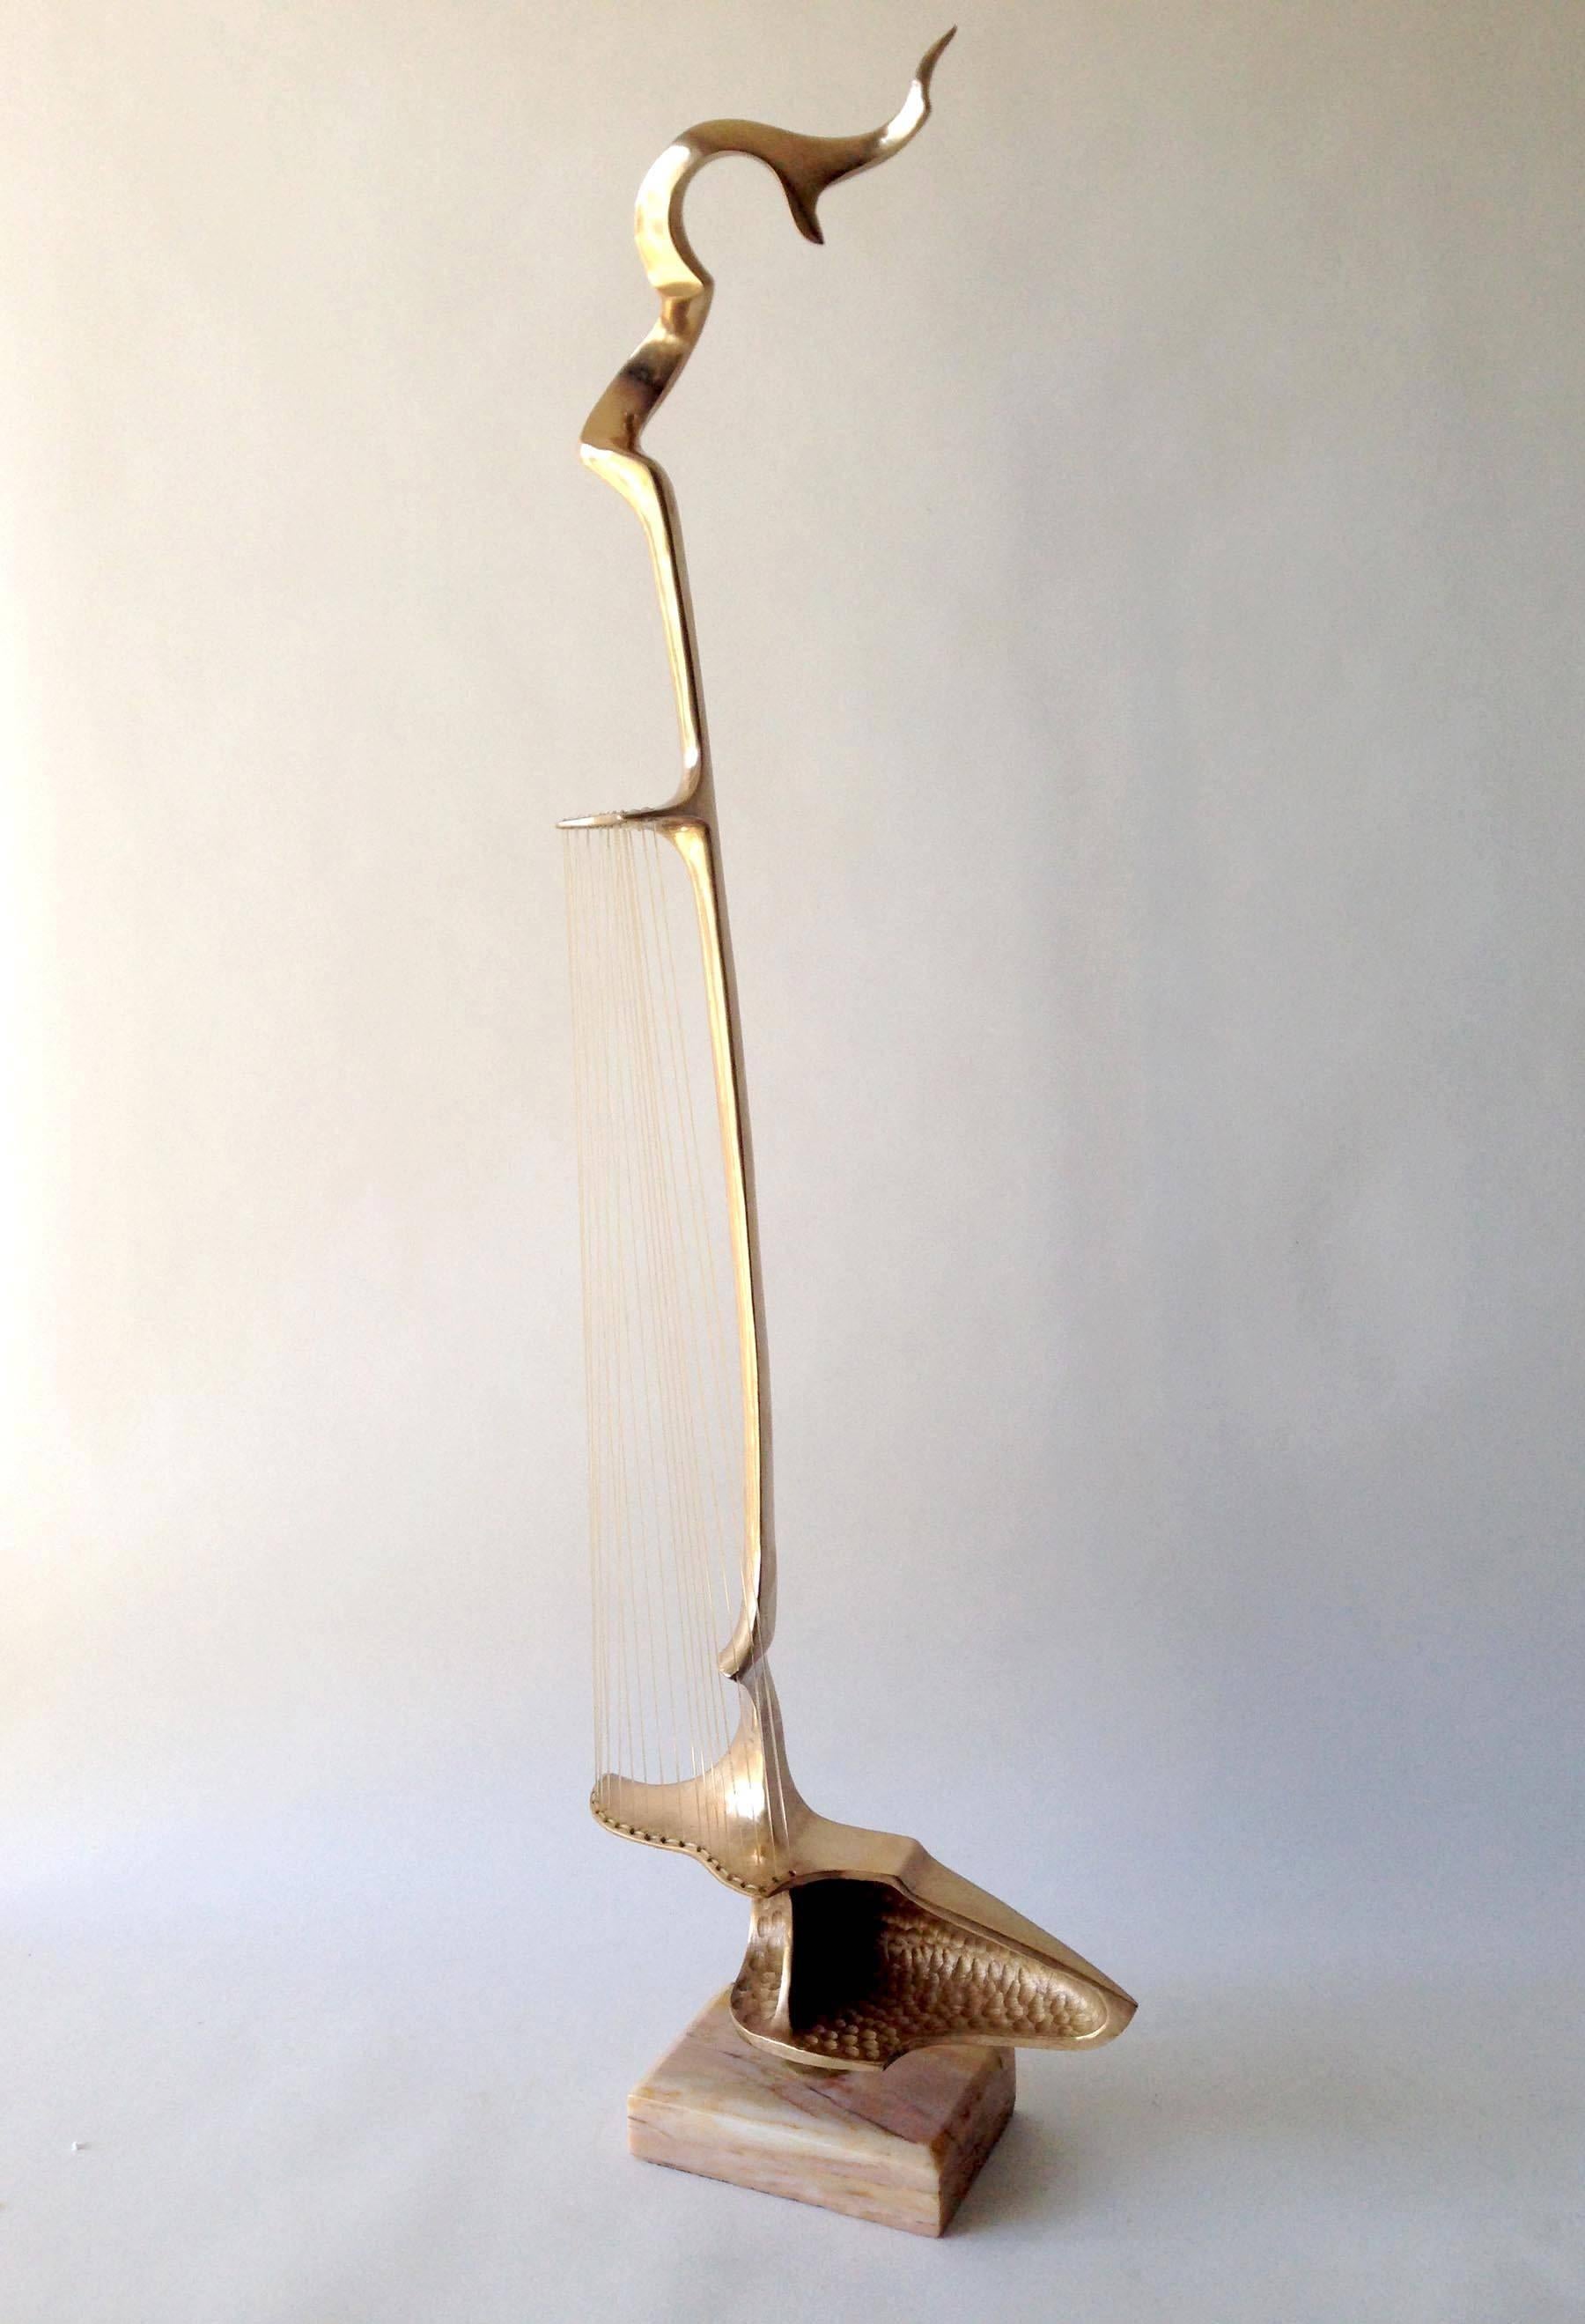 A modernist bronze lute sculpture created by Hattakitkosol Somchai of Thailand. Sculpture is comprised of a cast bronze lute with nylon strings and sits on a marble base. Piece is quite tall and measures 39